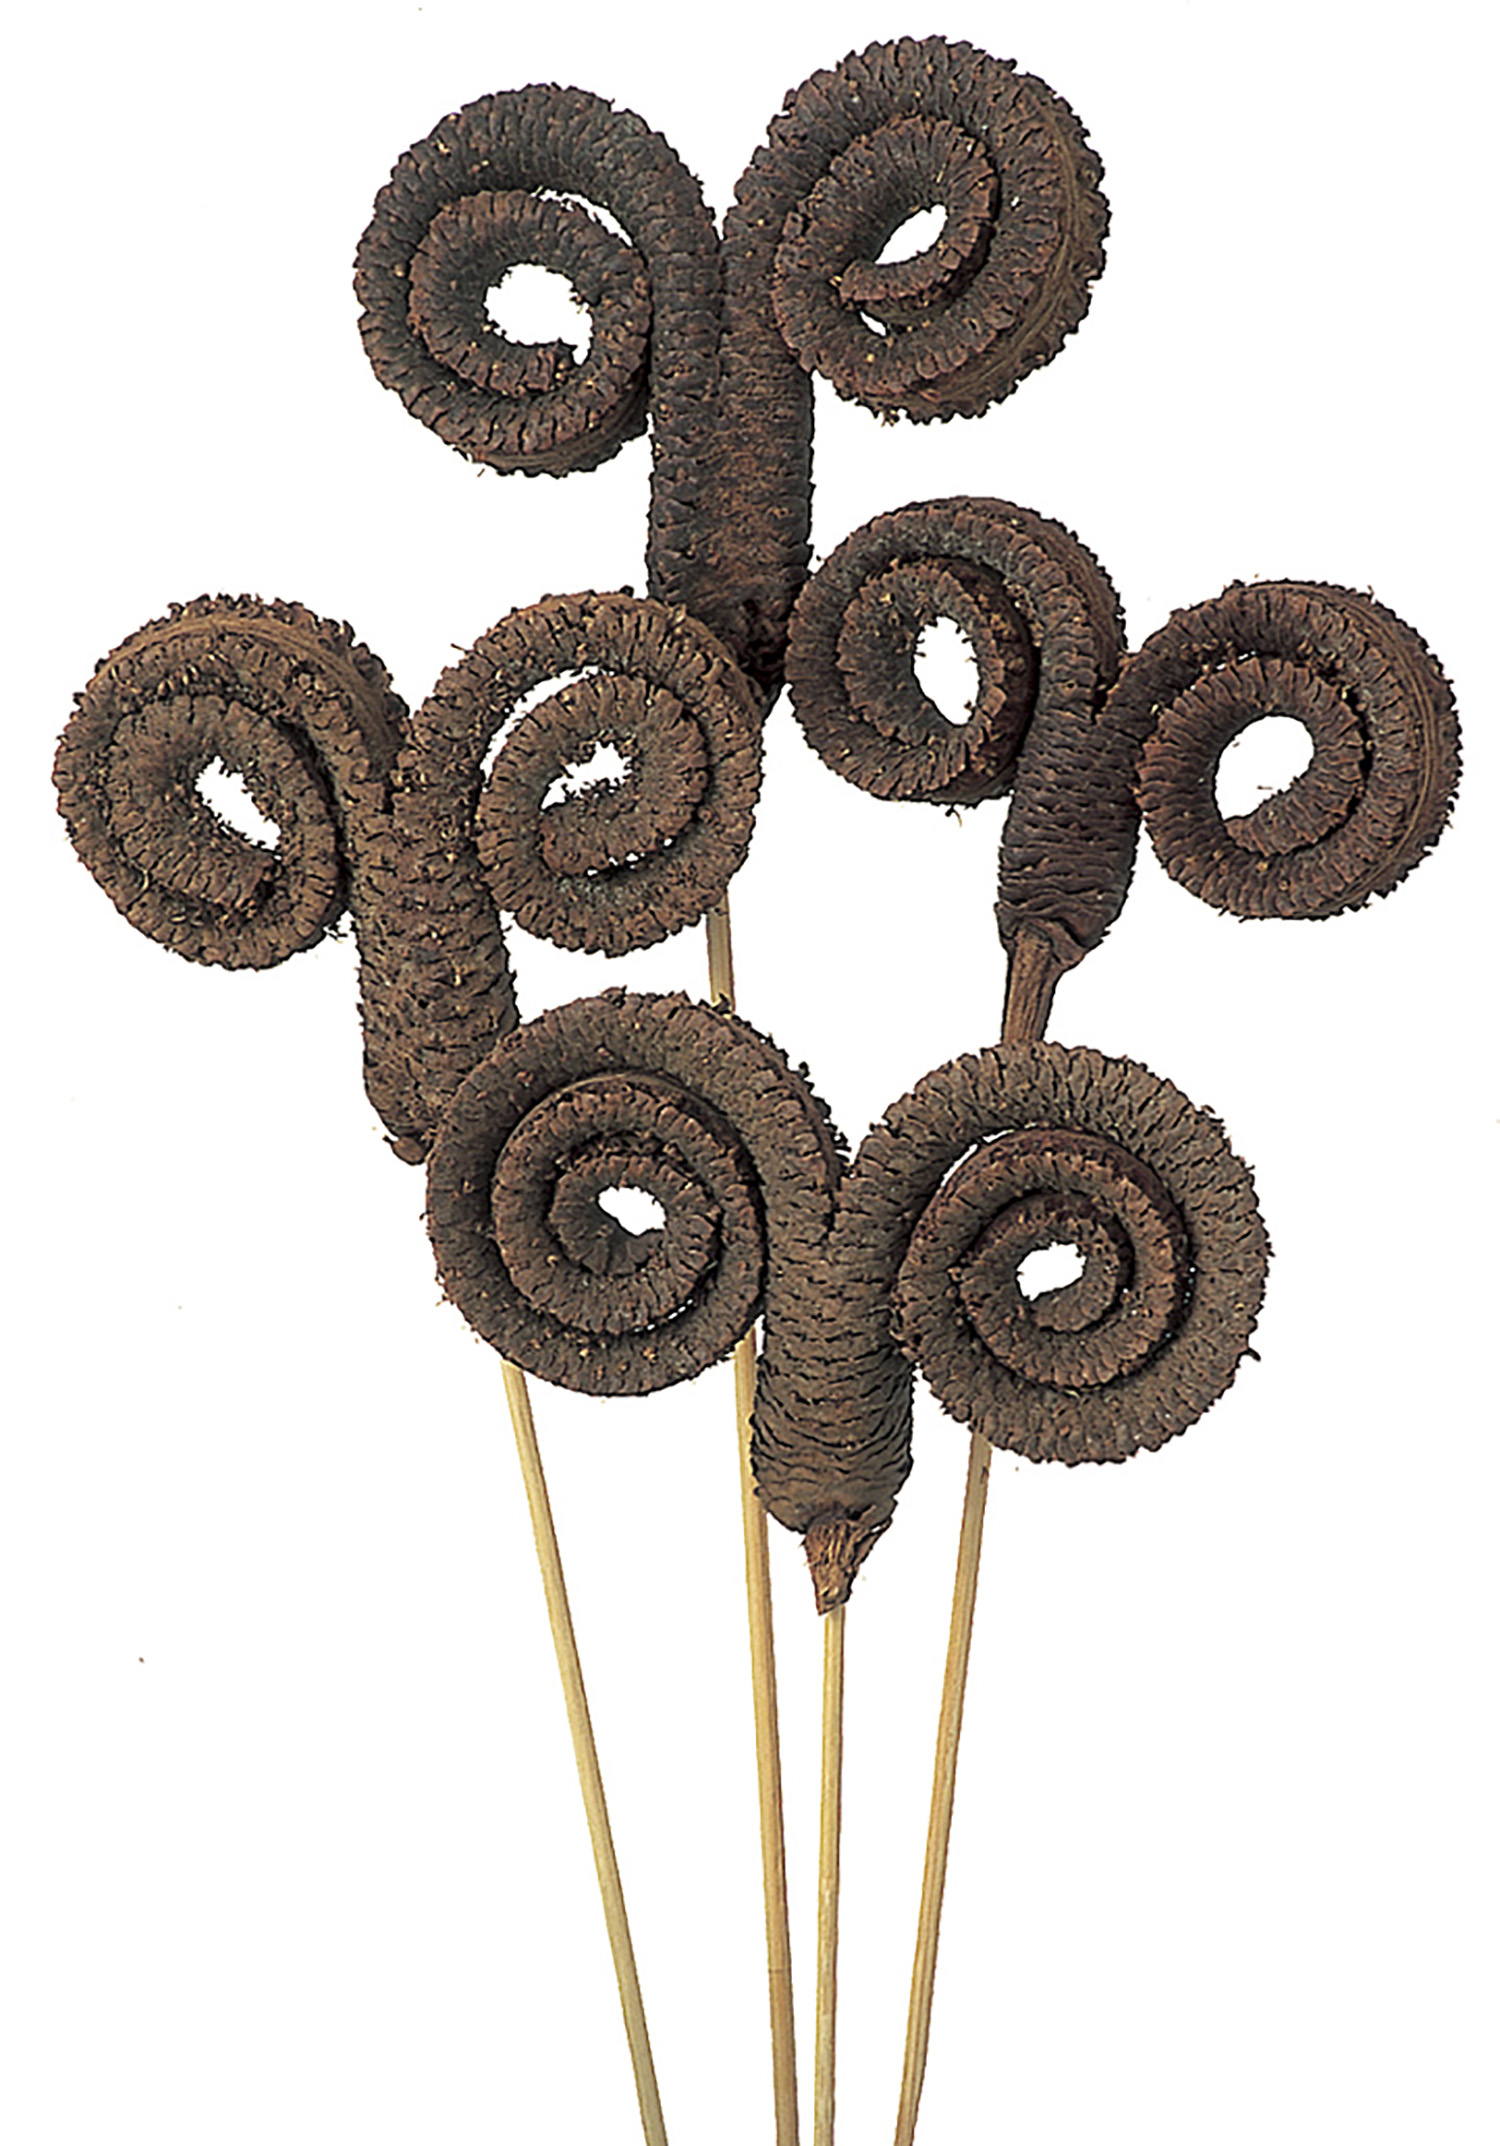 NATURAL PRODUCTS DRIED FLOWERS AND ERBS, Cones and fruits with stem, PALM RING 6 PZ 70 CM GAMBATO N,